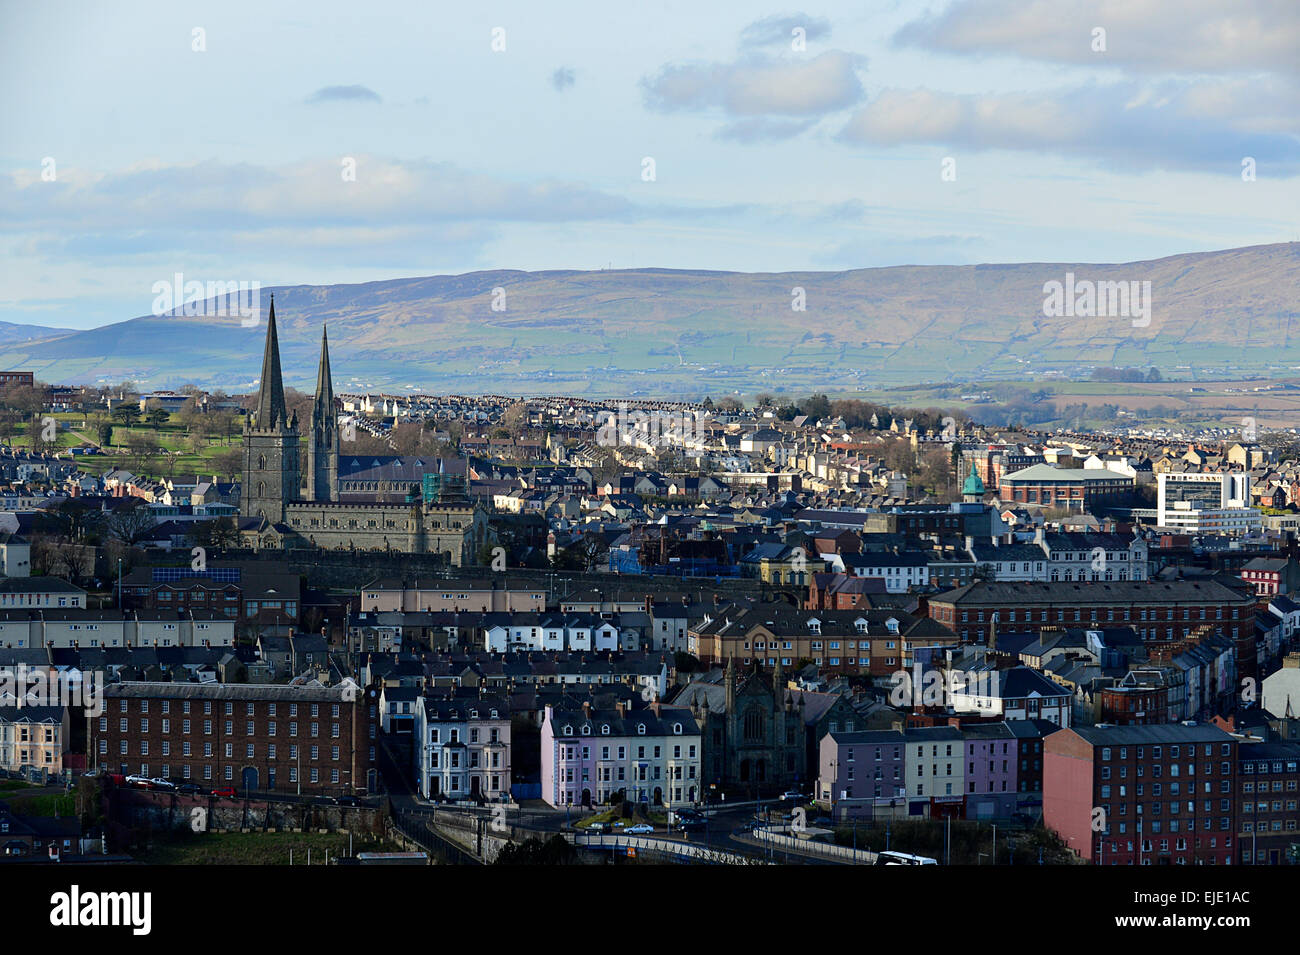 Londonderry, Derry, skyline and two cathedrals Stock Photo